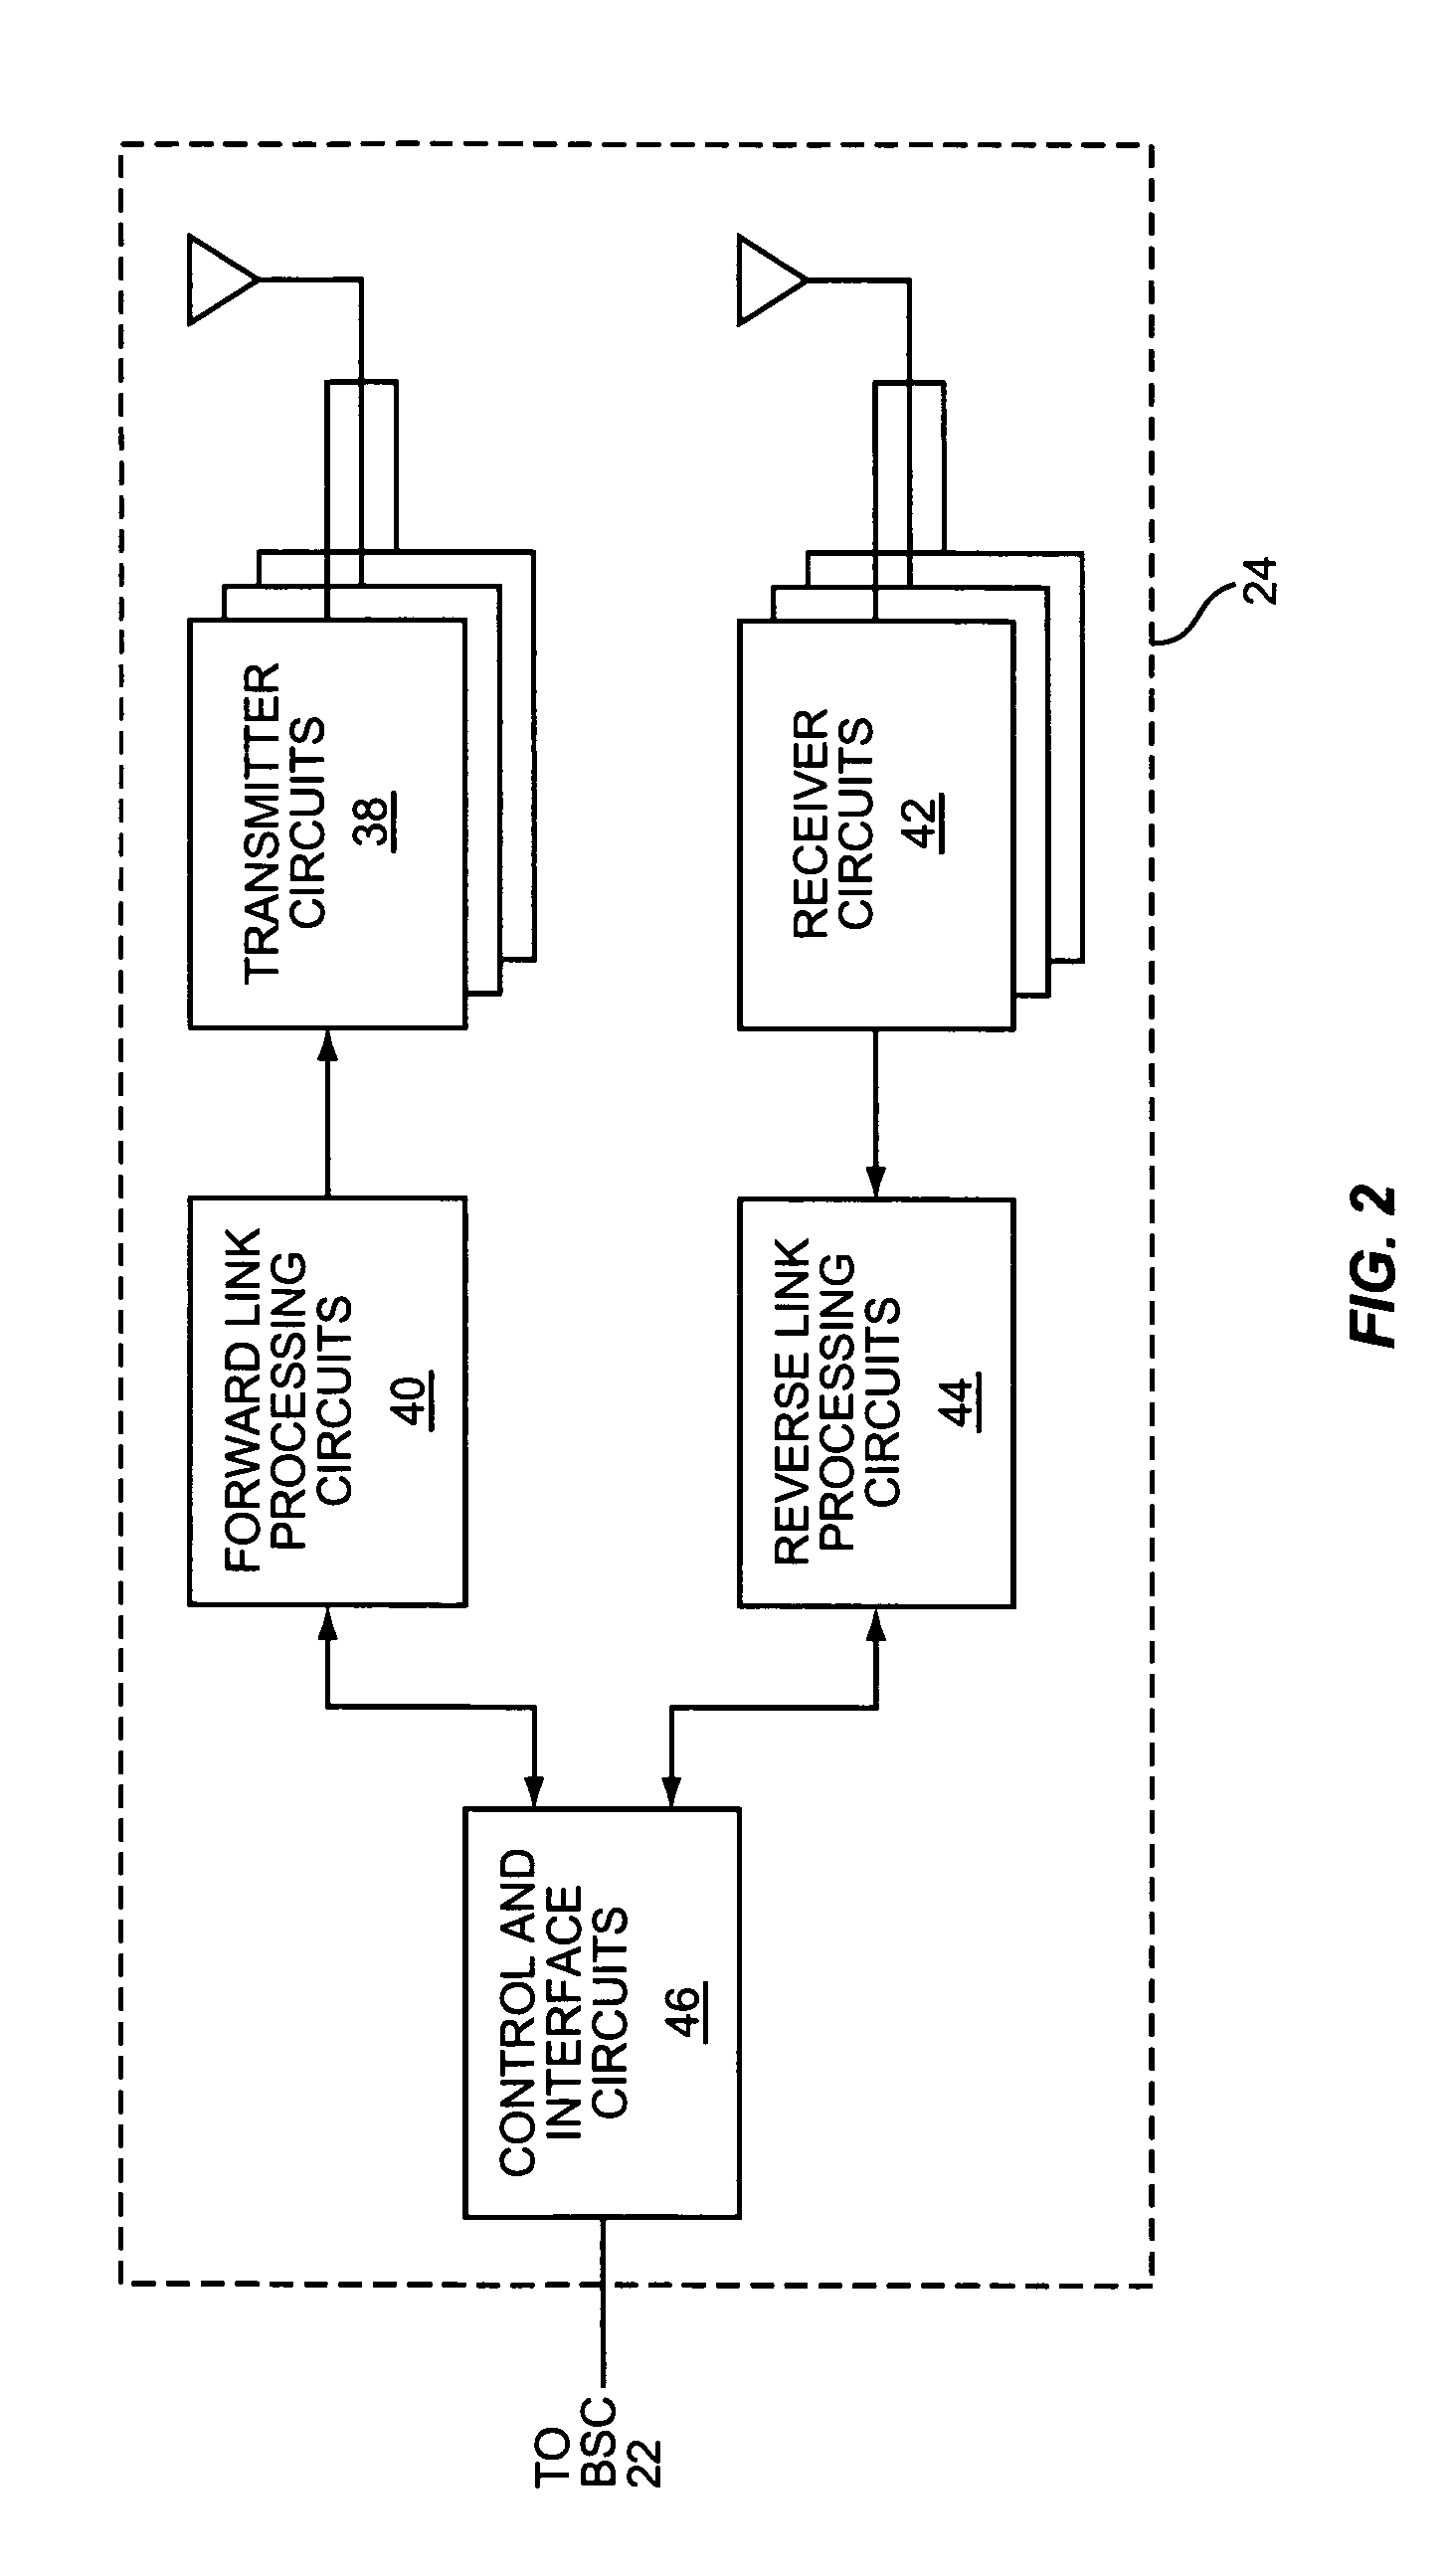 Power control for reverse packet data channel in CDMA systems